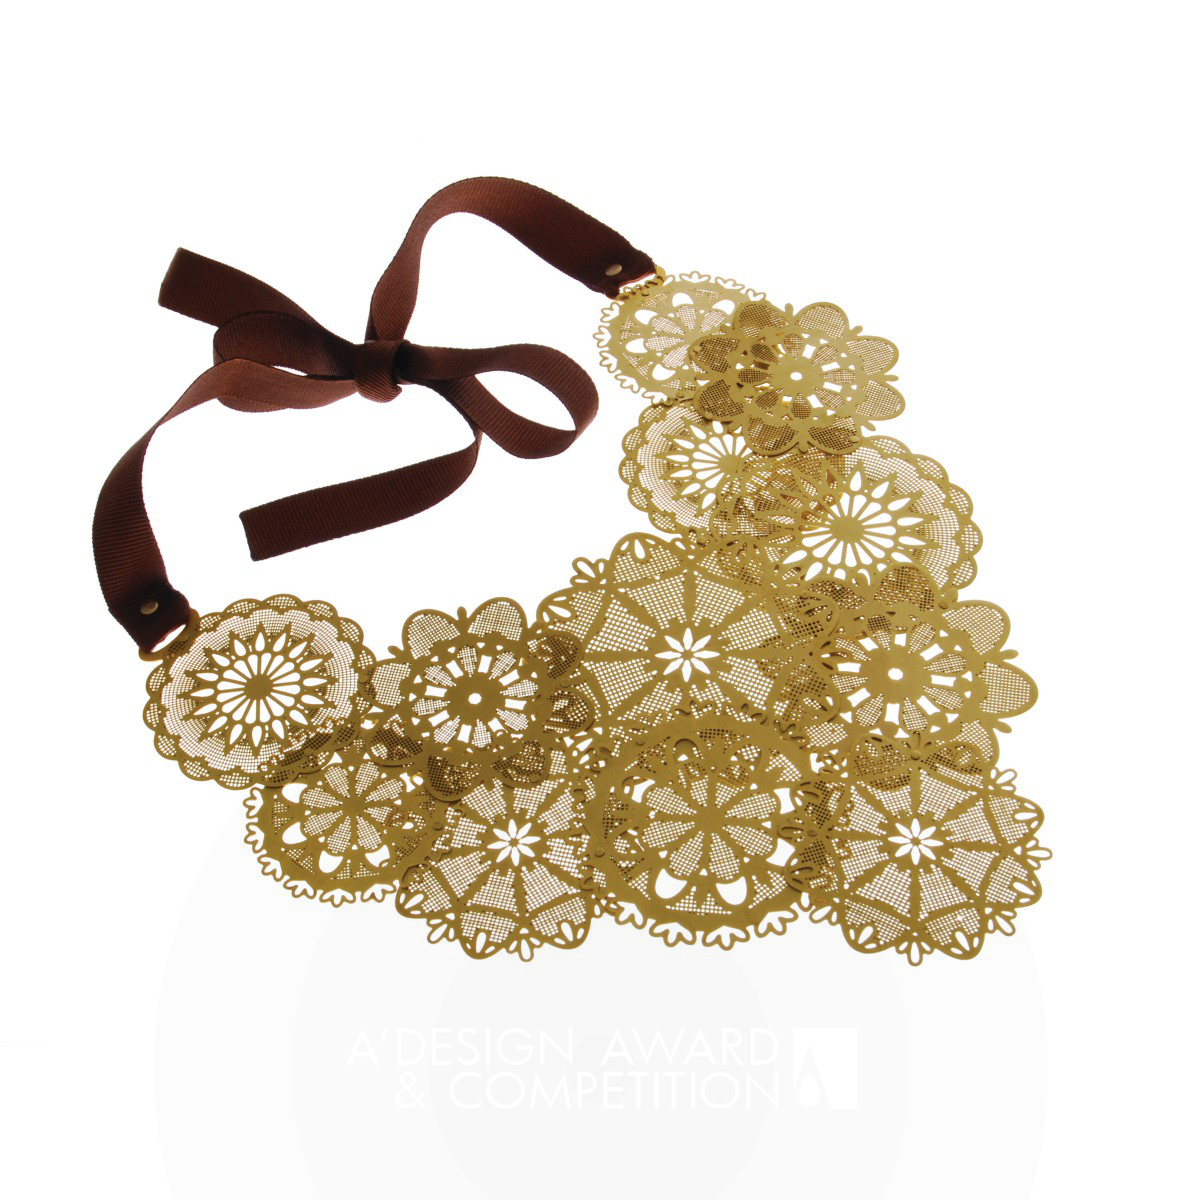 Camilla Marcondes wins Iron at the prestigious A' Jewelry Design Award with Crocheted Necklace.